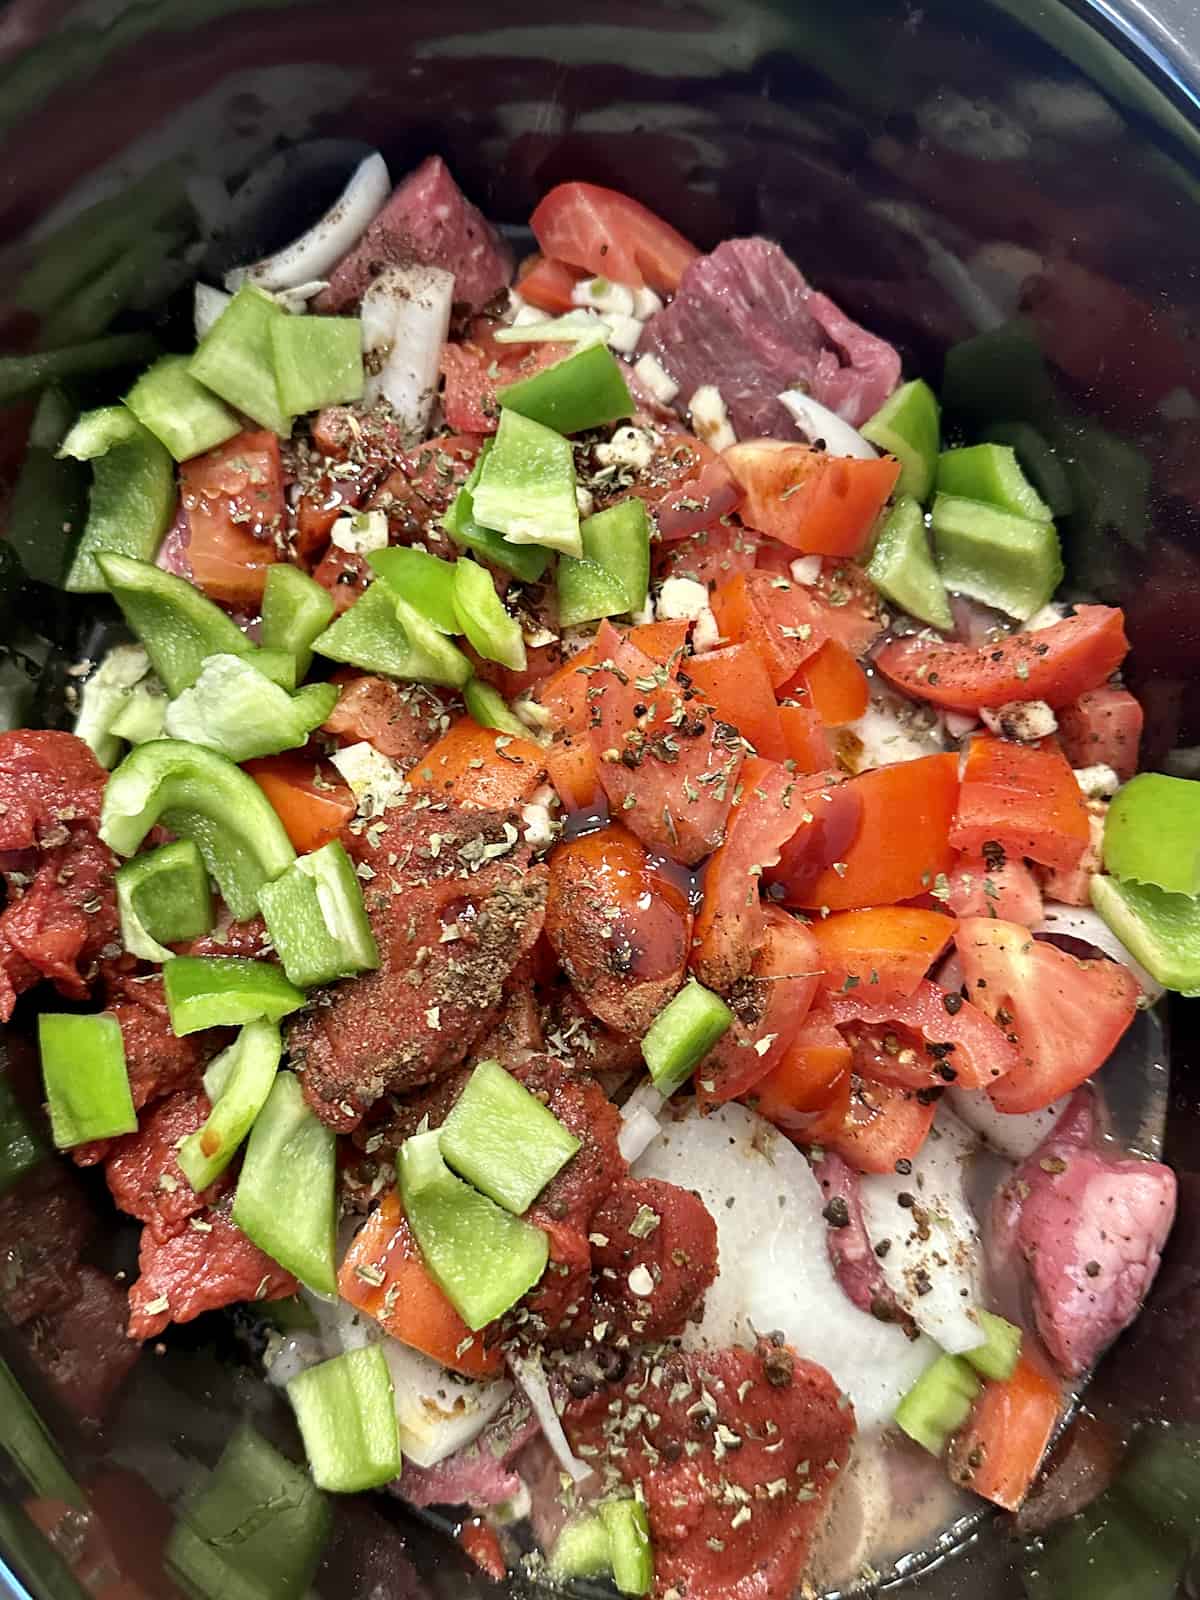 chopped vegetables and meat in a crockpot